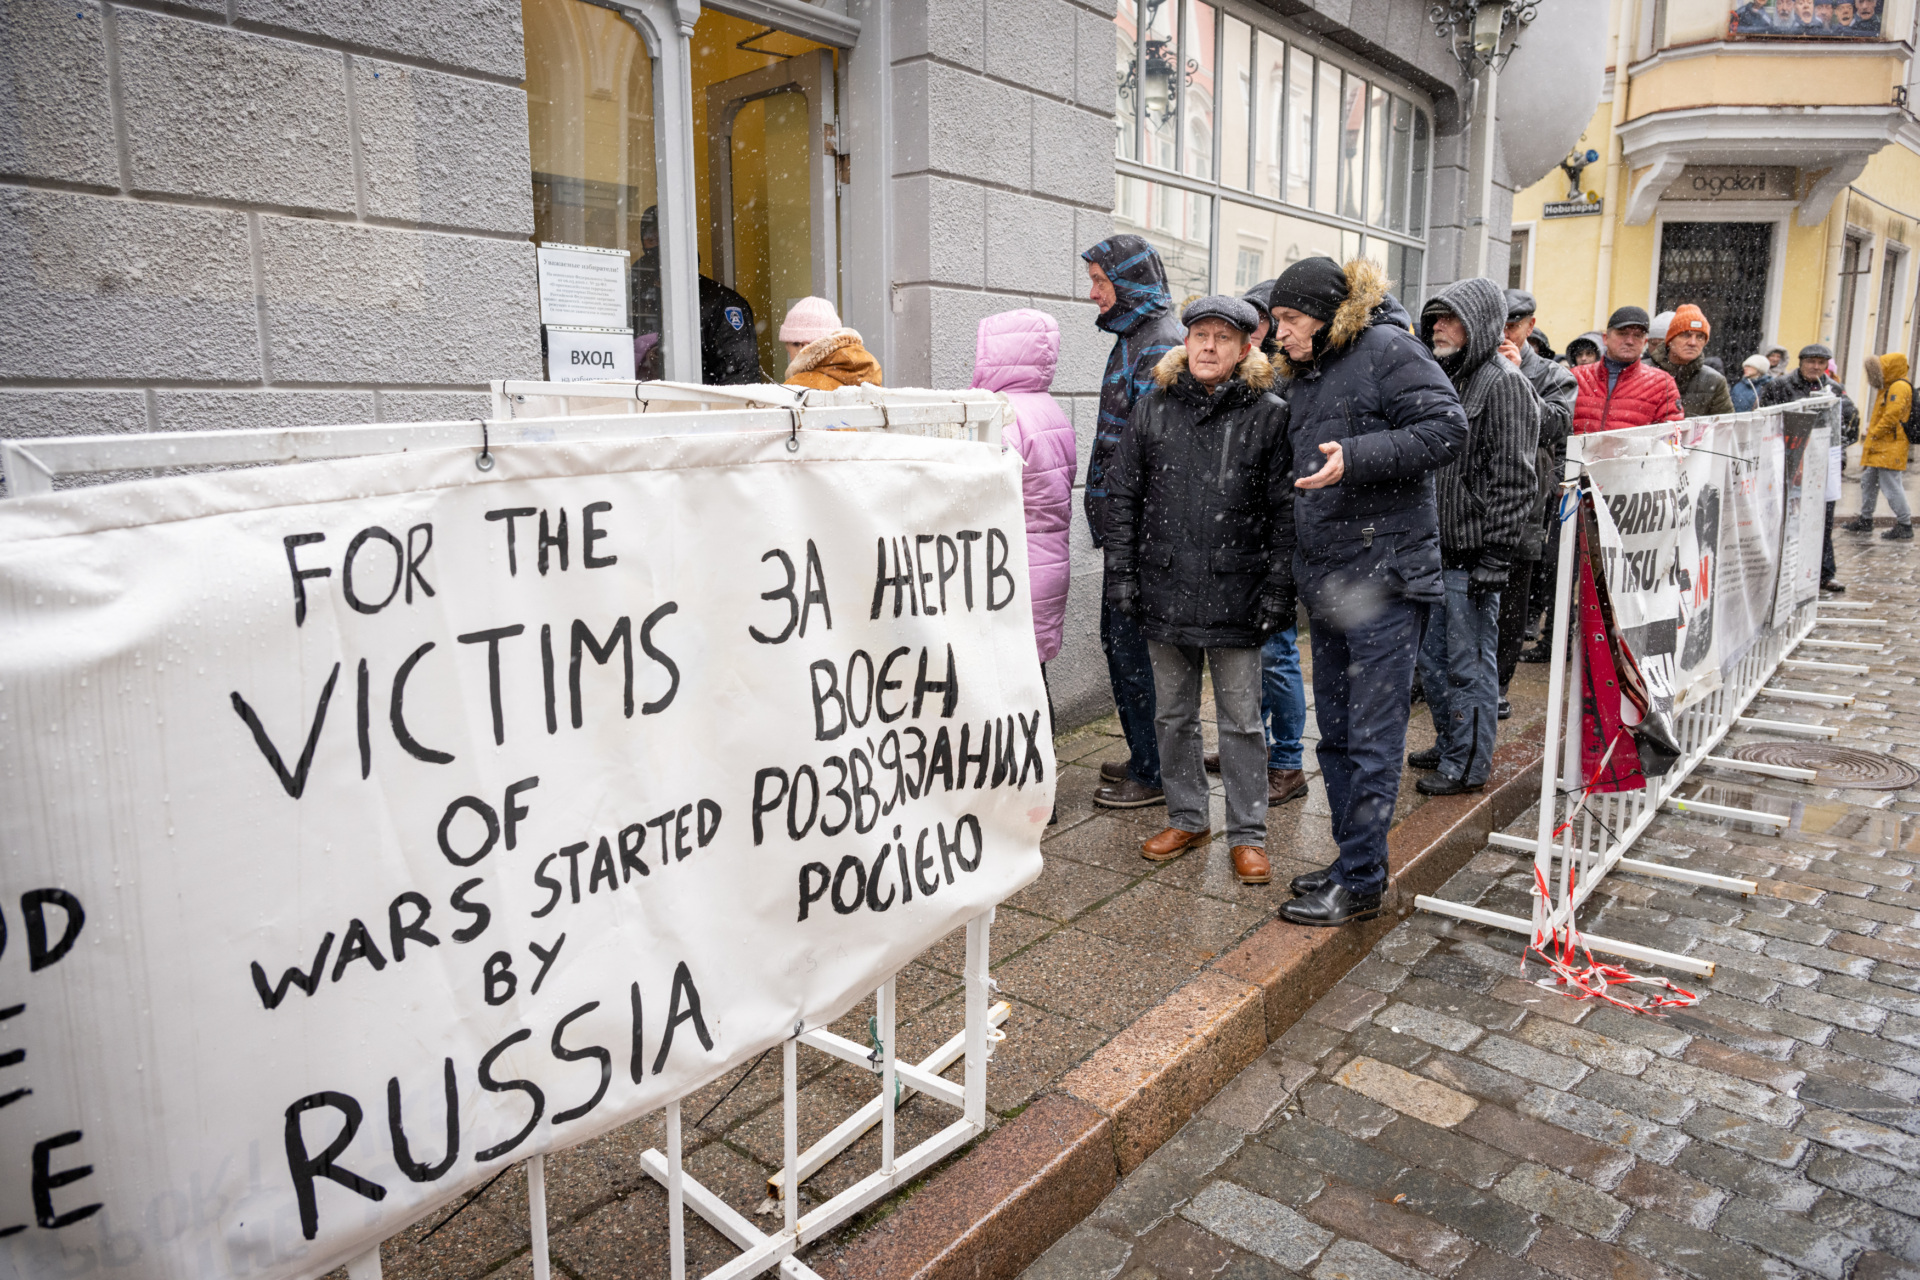 Voters queue in front of the Russian Embassy in Tallinn on March 17, 2024 during Russia's presidential election. (Photo by RAIGO PAJULA / AFP) (Photo by RAIGO PAJULA/AFP via Getty Images)